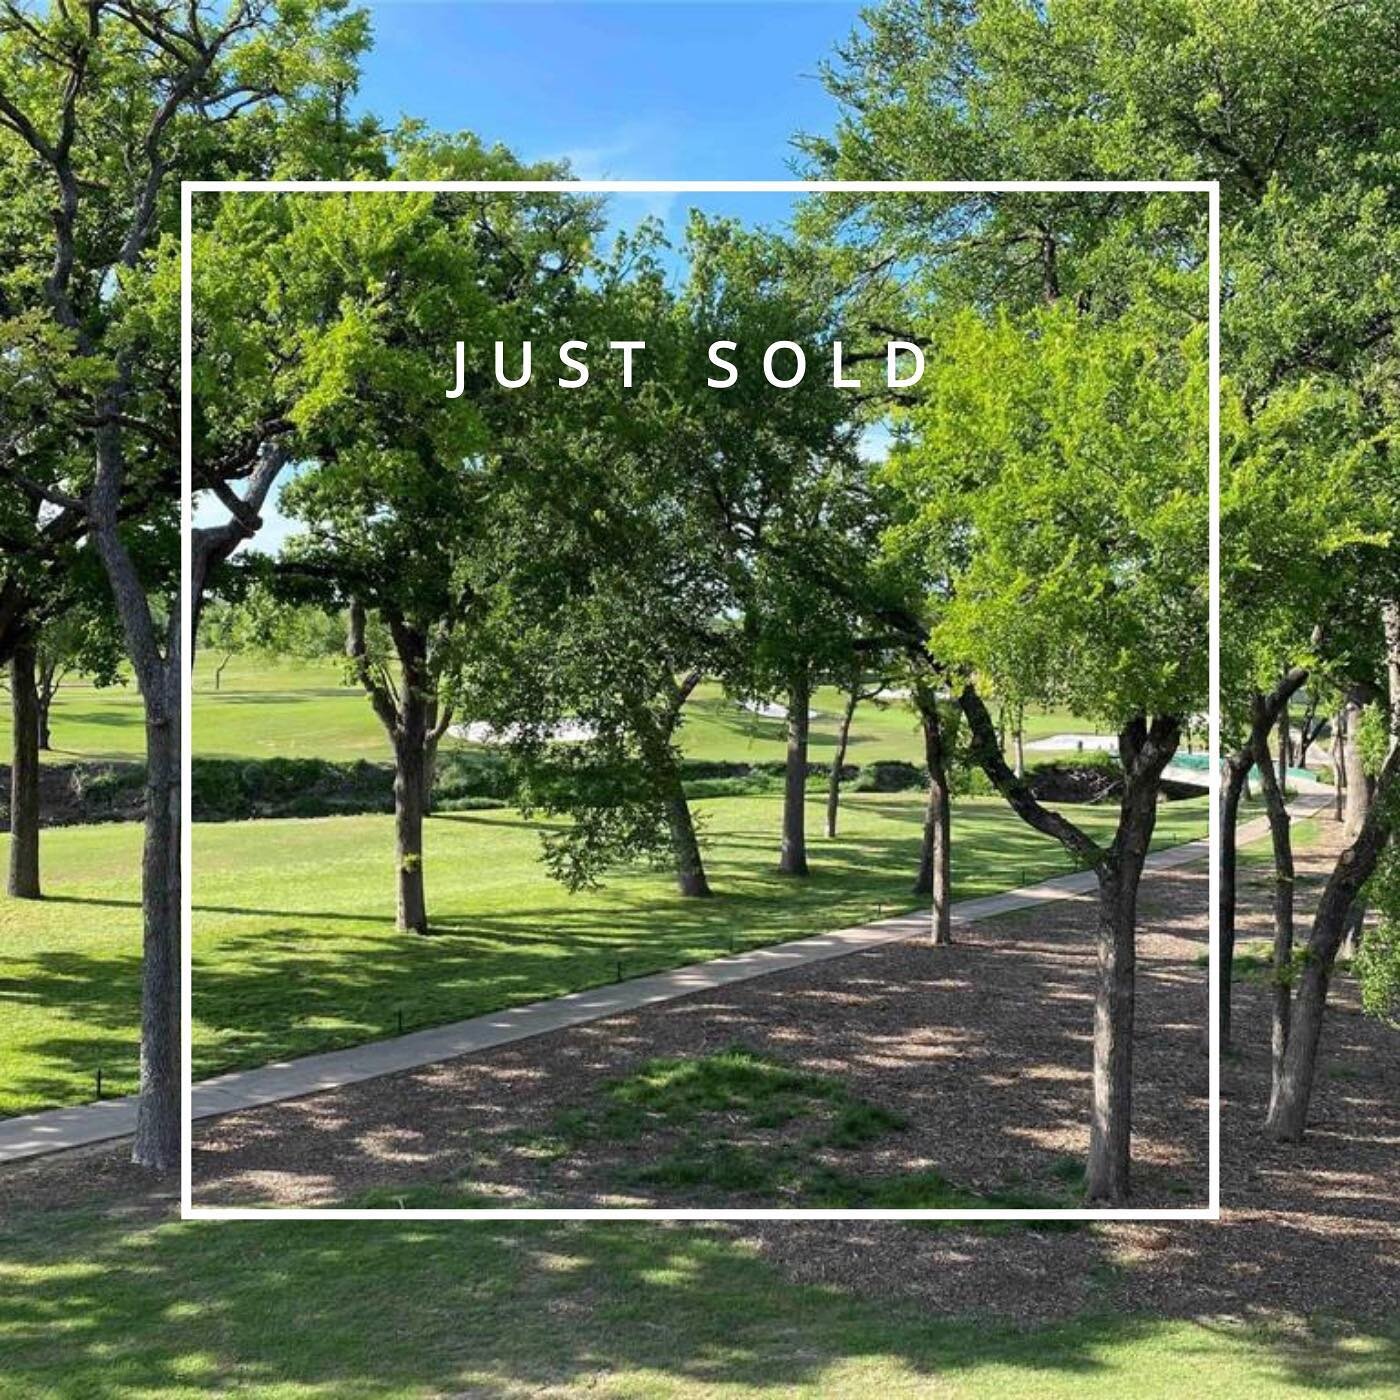 JUST SOLD ⛳️💎⛳️ @caudlerealestategroup

Wow, this was fun! An old colleague from LA called, and wanted a good TX investment 🇨🇱💰 We found this gorgeous condo overlooking a golf course (The Clubs of Prestonwood) in North Dallas 🏌️&zwj;♀️|| I&rsquo